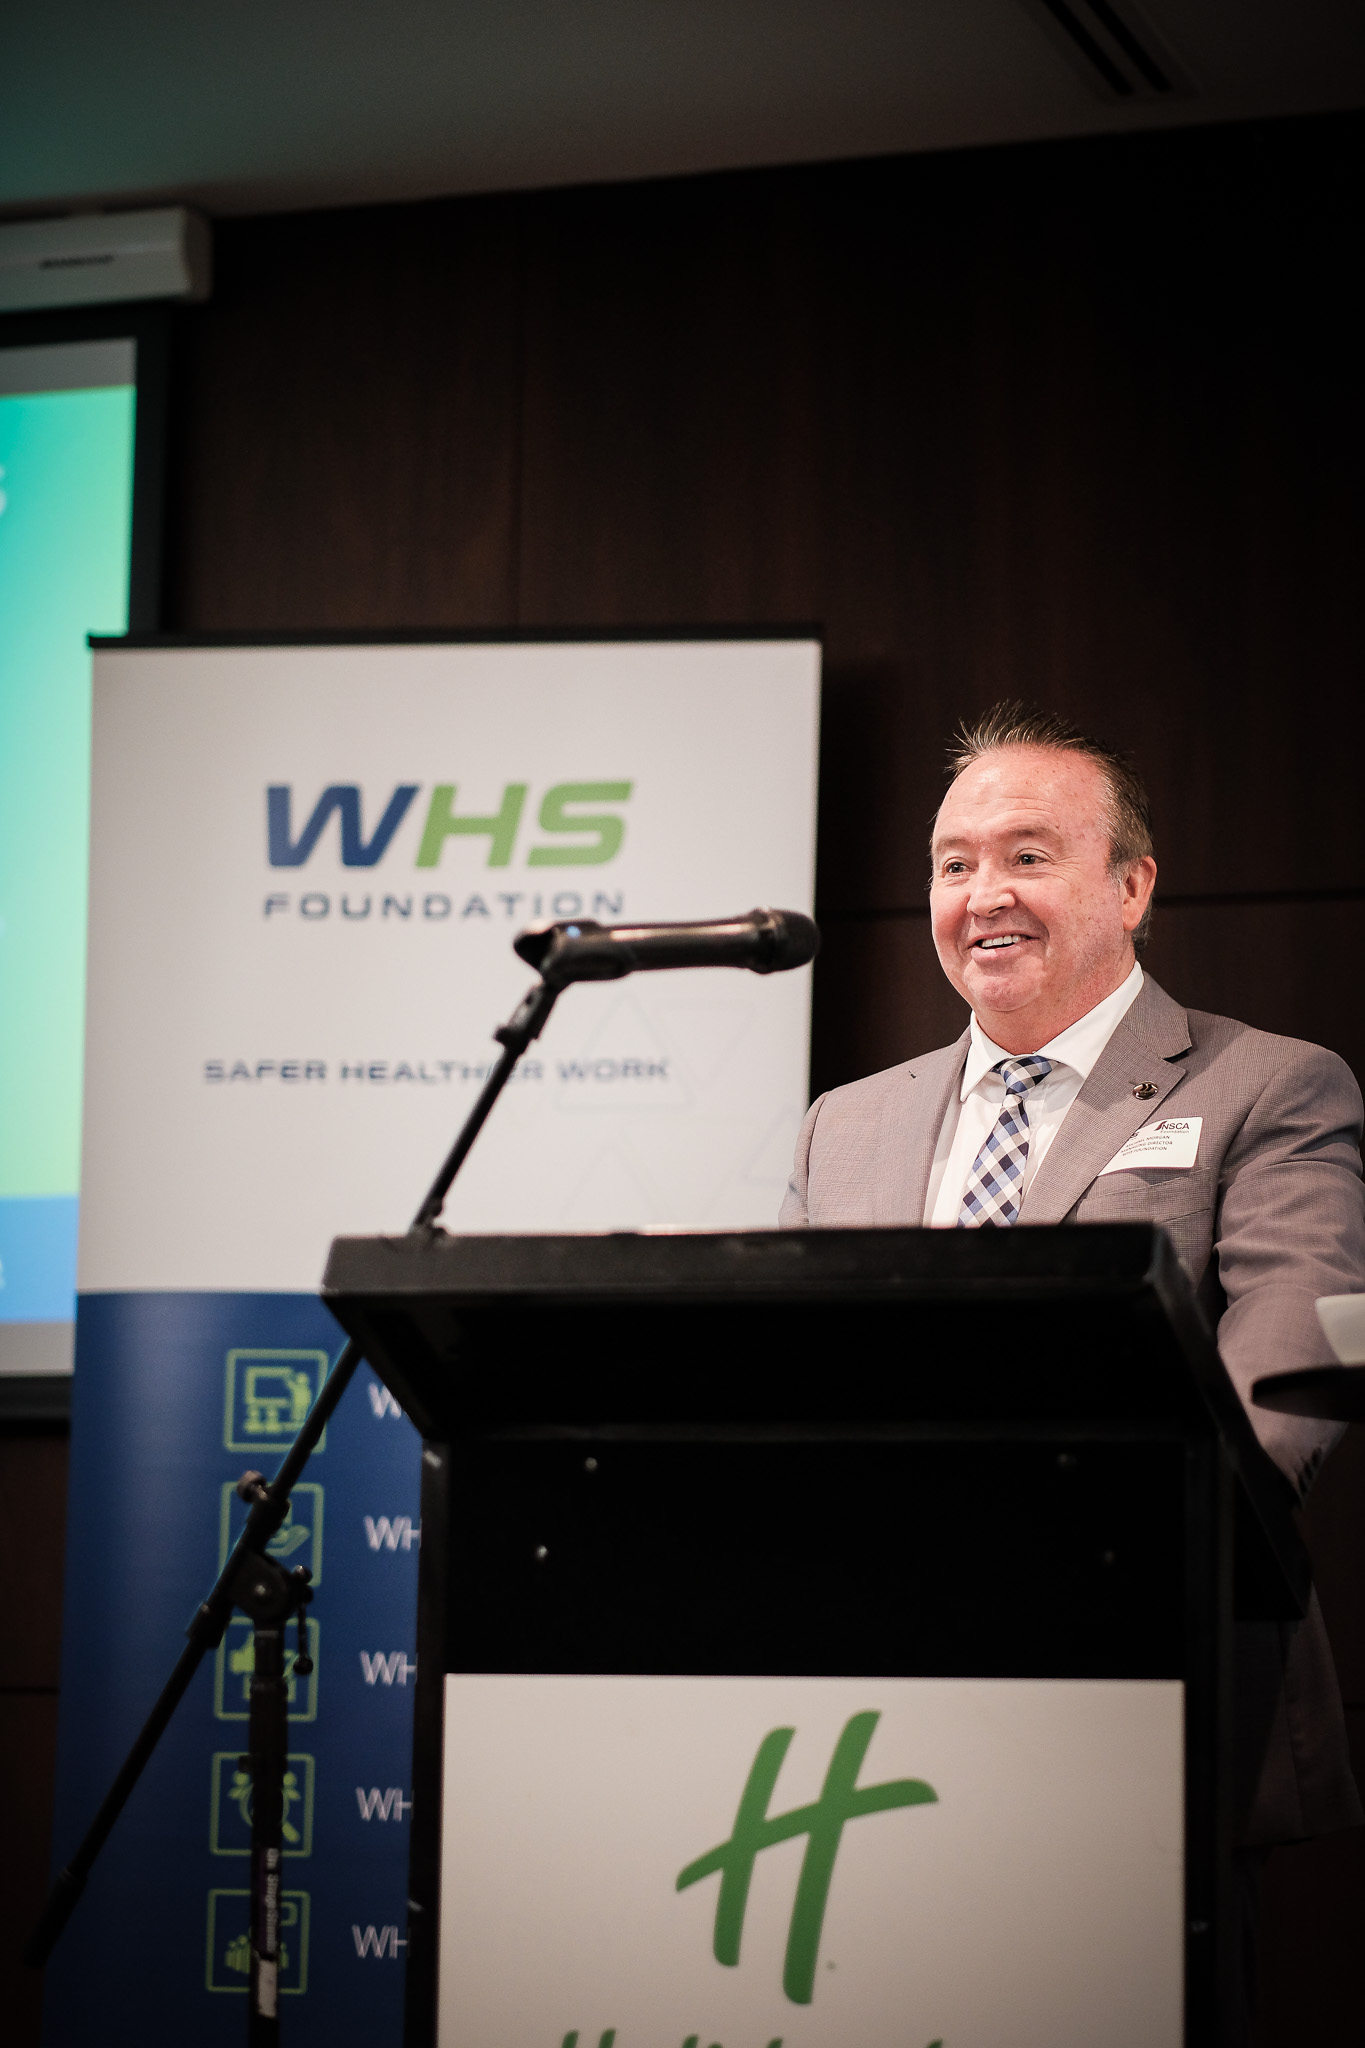 Michael Morgan, Managing Director, WHS Foundation is standing at a lectern presenting at the Perth Safety Forum